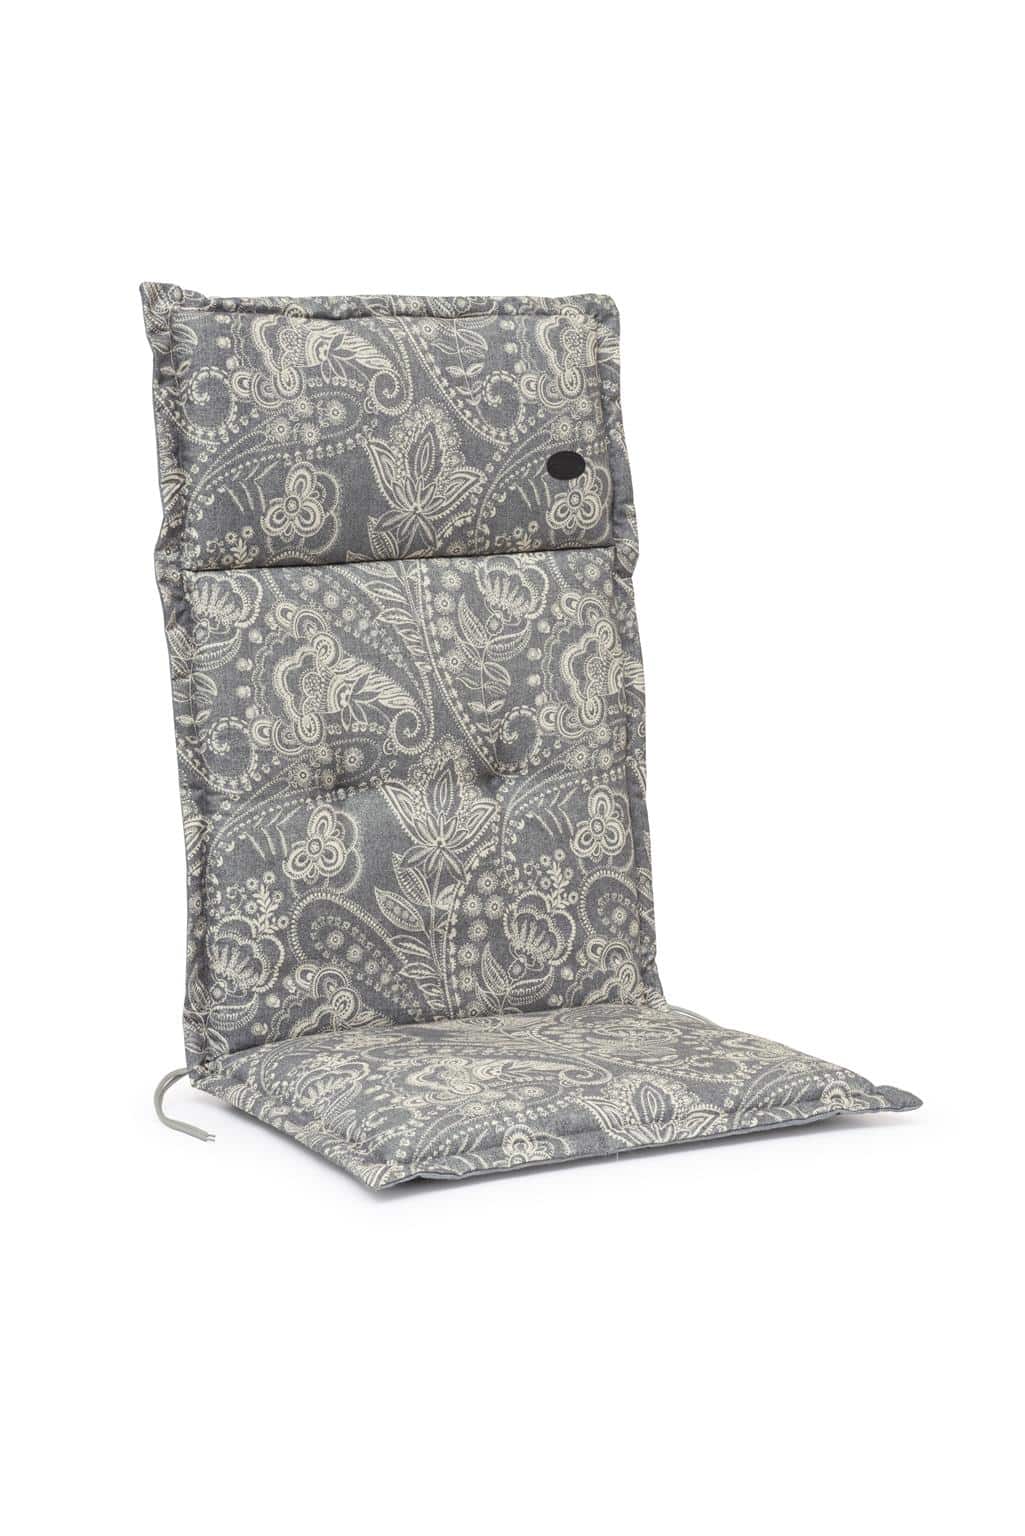 Hillerstorp Milano Dyna Hög 50x117x5 cm Paisley beige bomull.